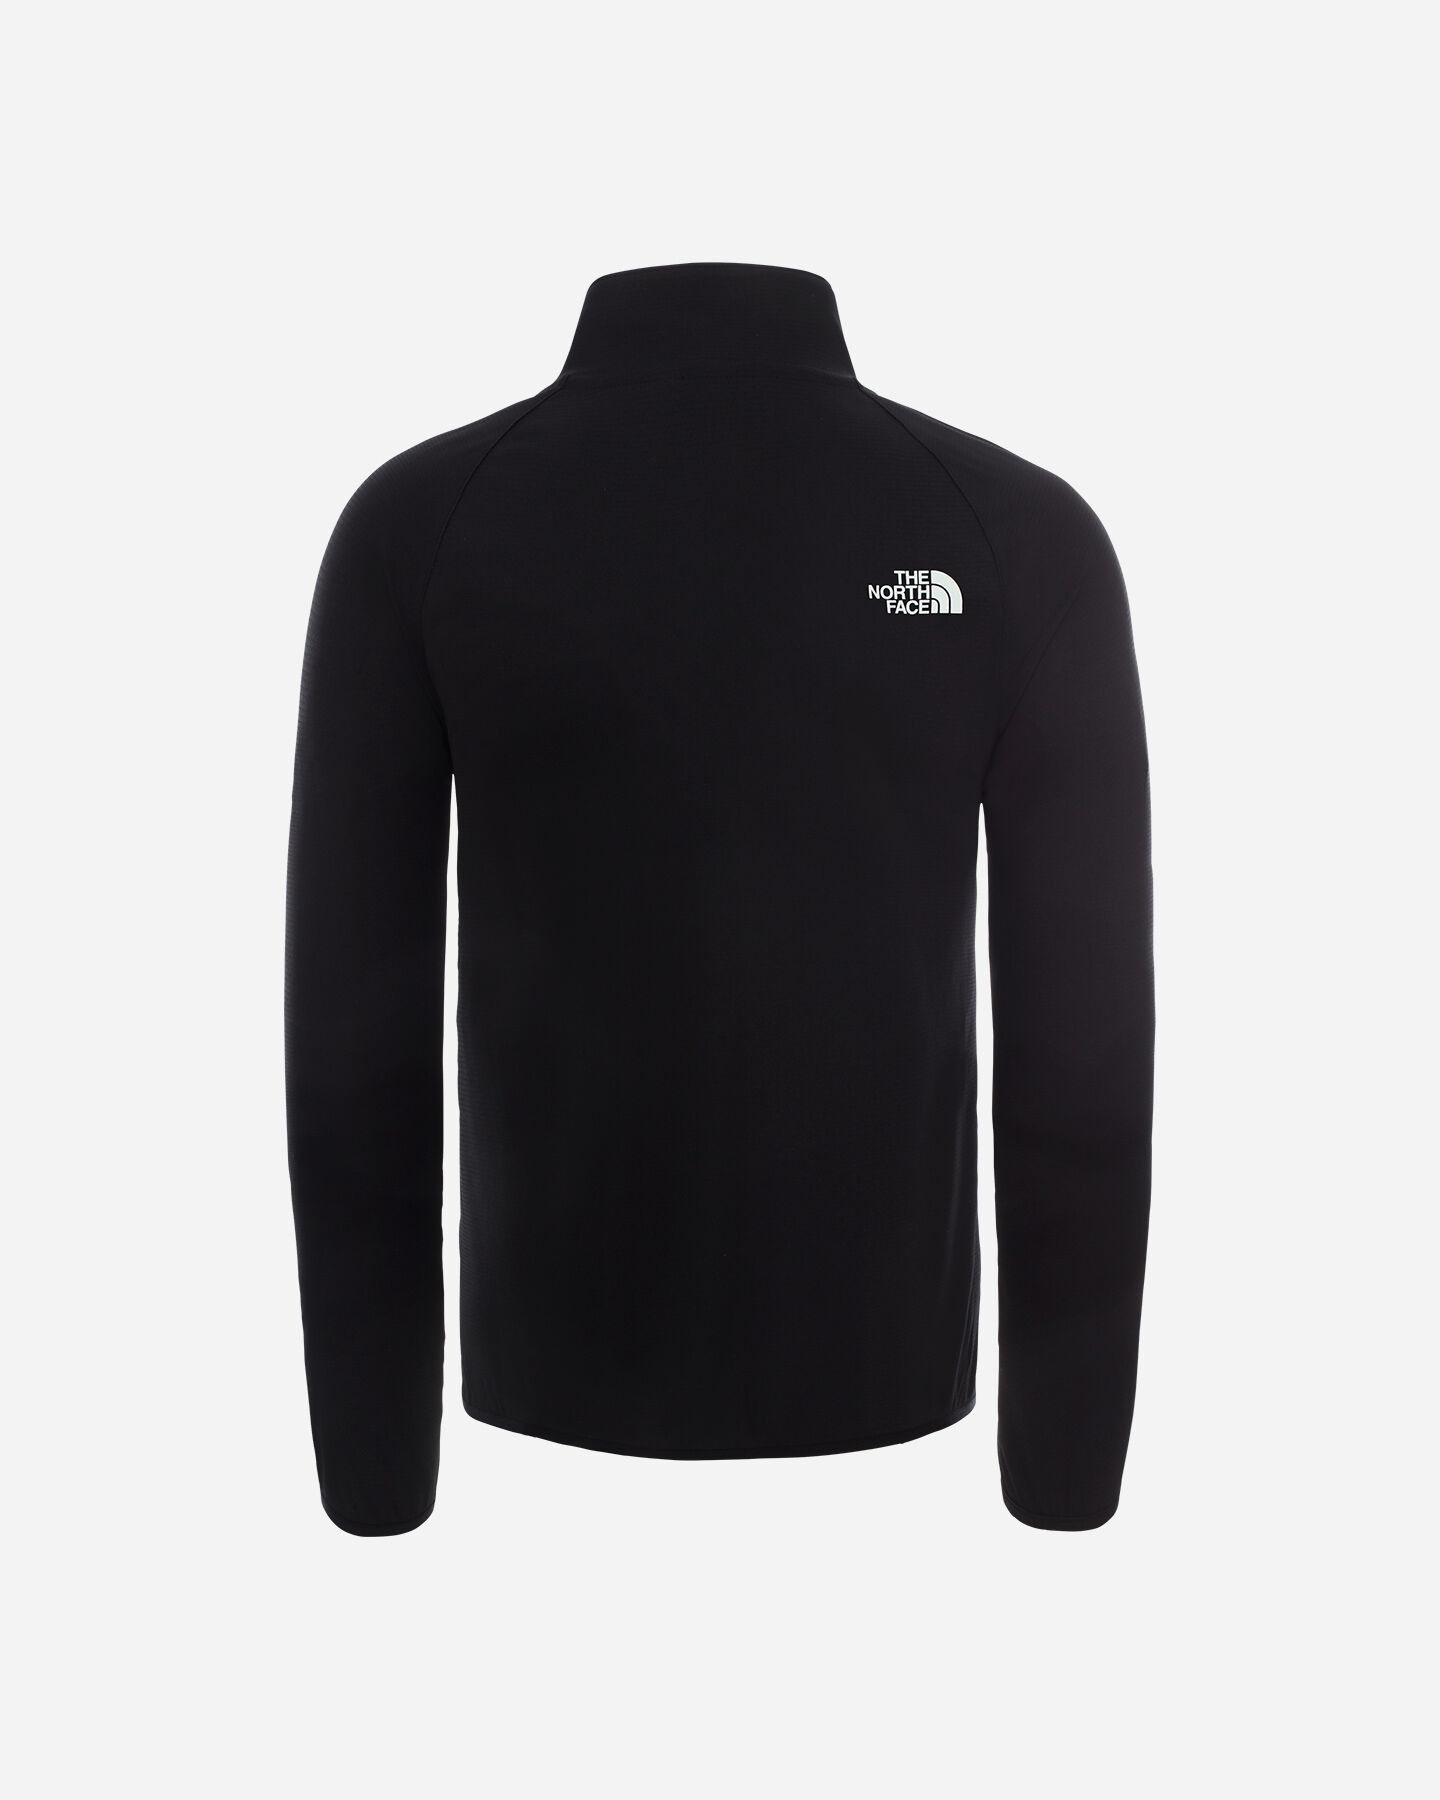  Pile THE NORTH FACE EXTENT III M S5292189|Y01|S scatto 1